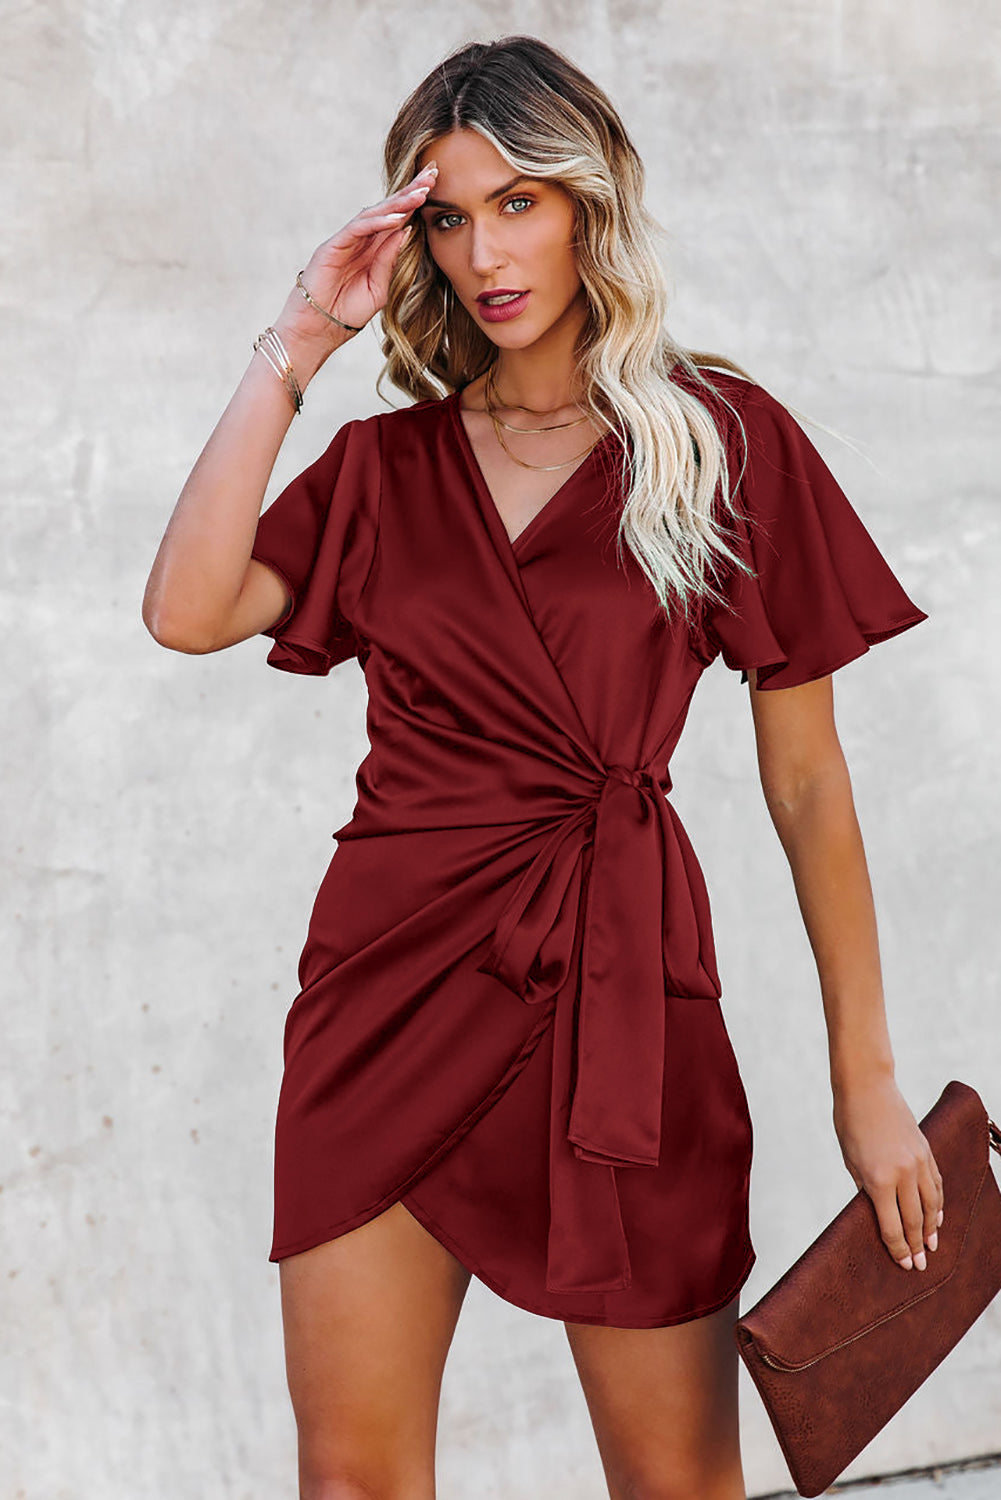 LC6113672-3-S, LC6113672-3-M, LC6113672-3-L, LC6113672-3-XL, LC6113672-3-2XL, Red dress